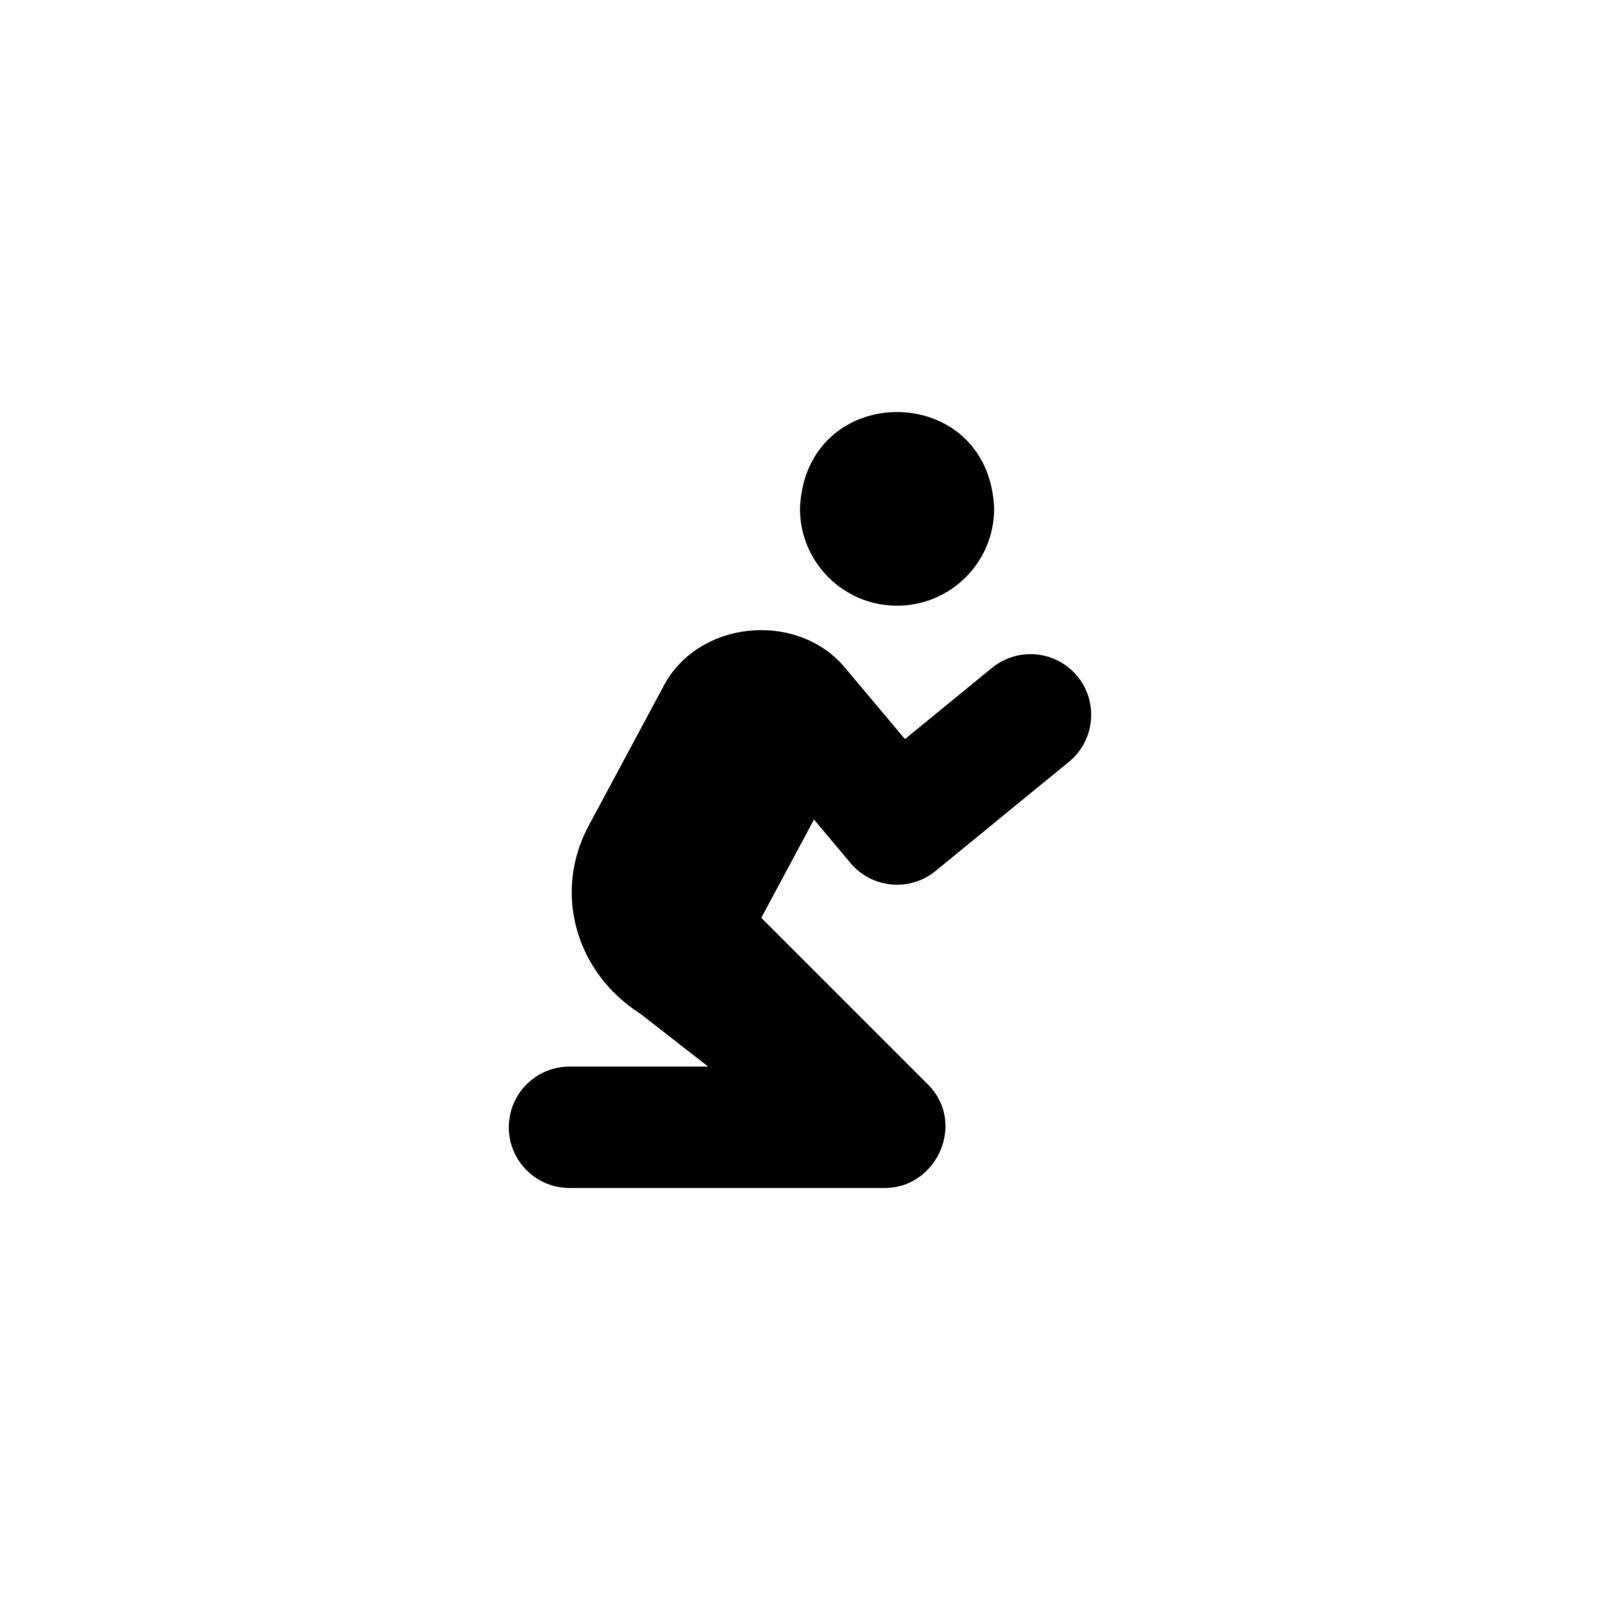 Pray icon Man Pose. Pray to God symbol isolated. Vector EPS 10 by TopRated